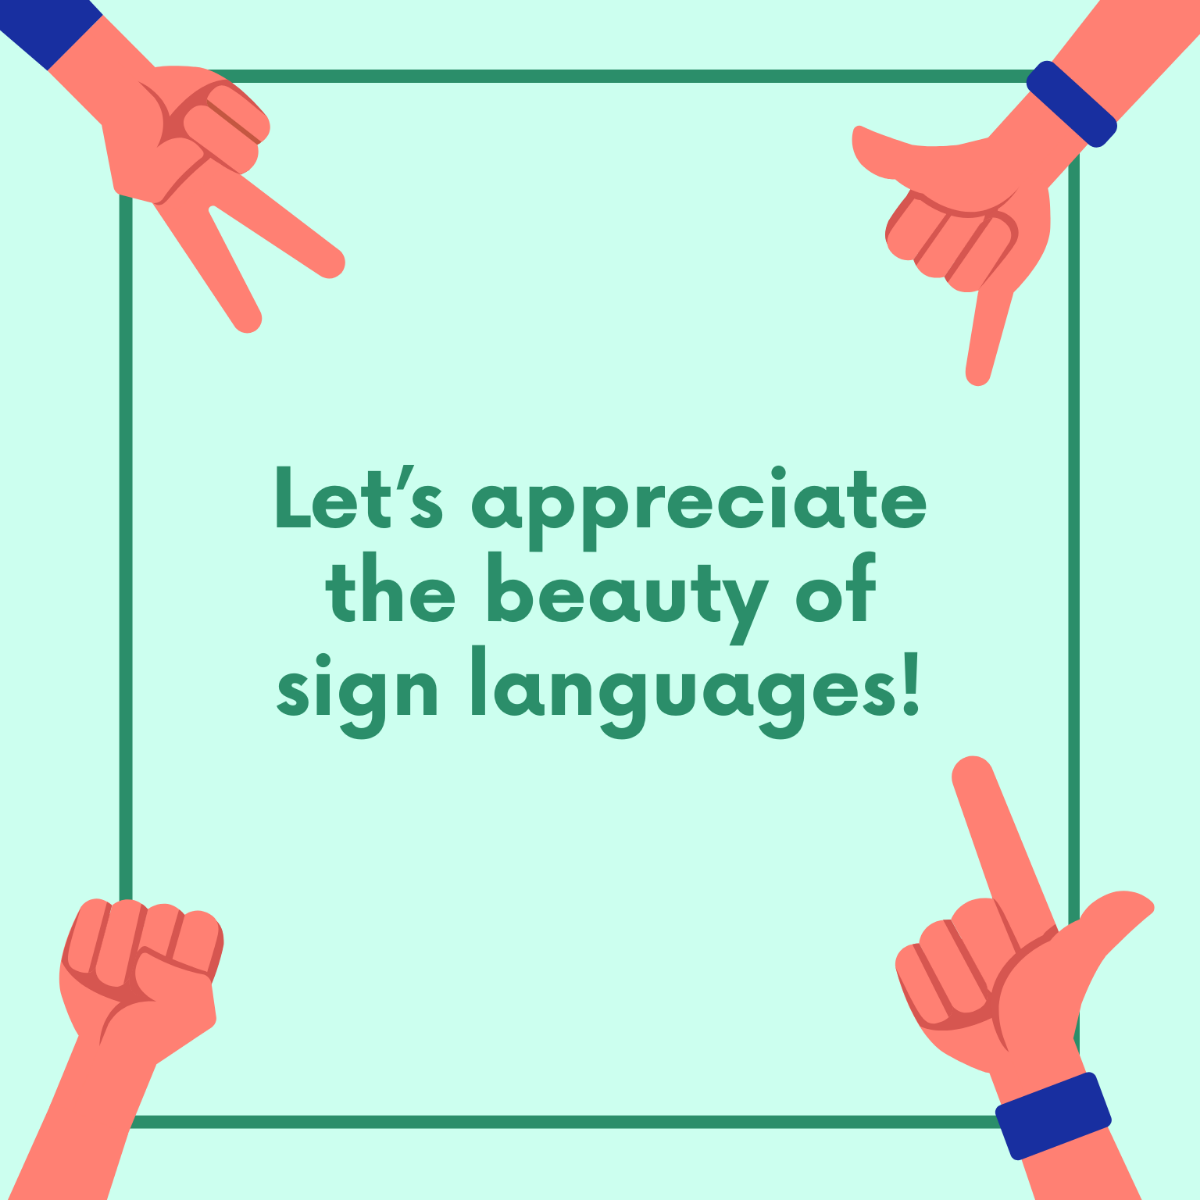 International Day of Sign Languages Greeting Card Vector Template